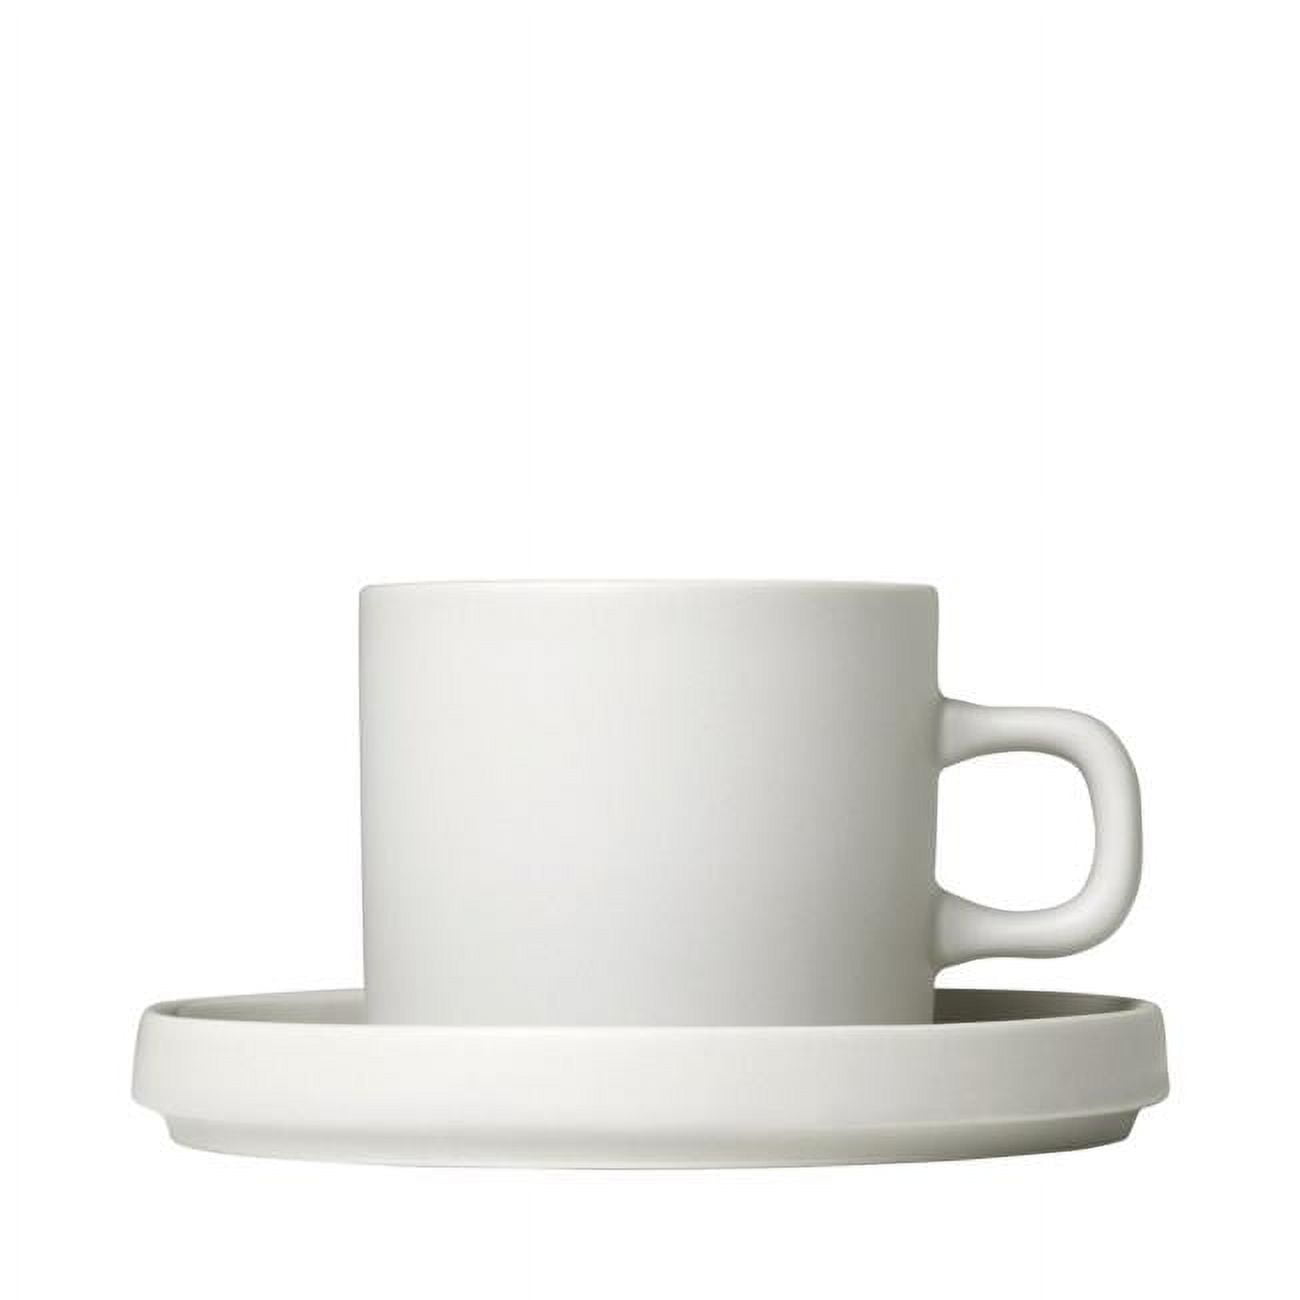 63907 7 Oz Mio Coffee Cups With Saucers, Moonbeam - Set Of 2